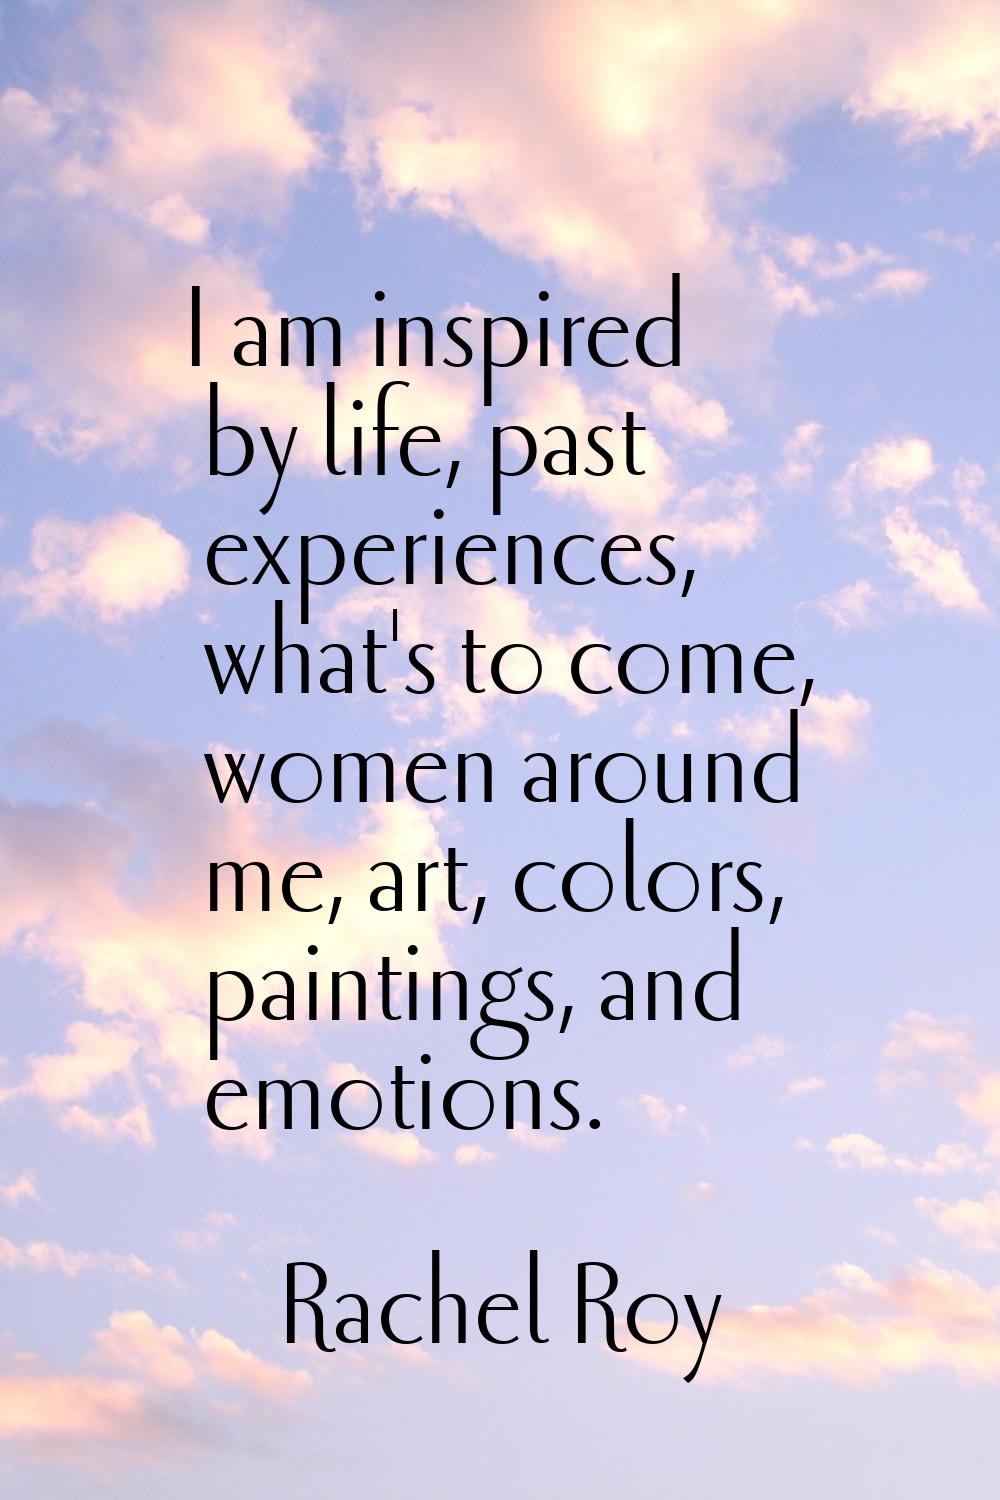 I am inspired by life, past experiences, what's to come, women around me, art, colors, paintings, a